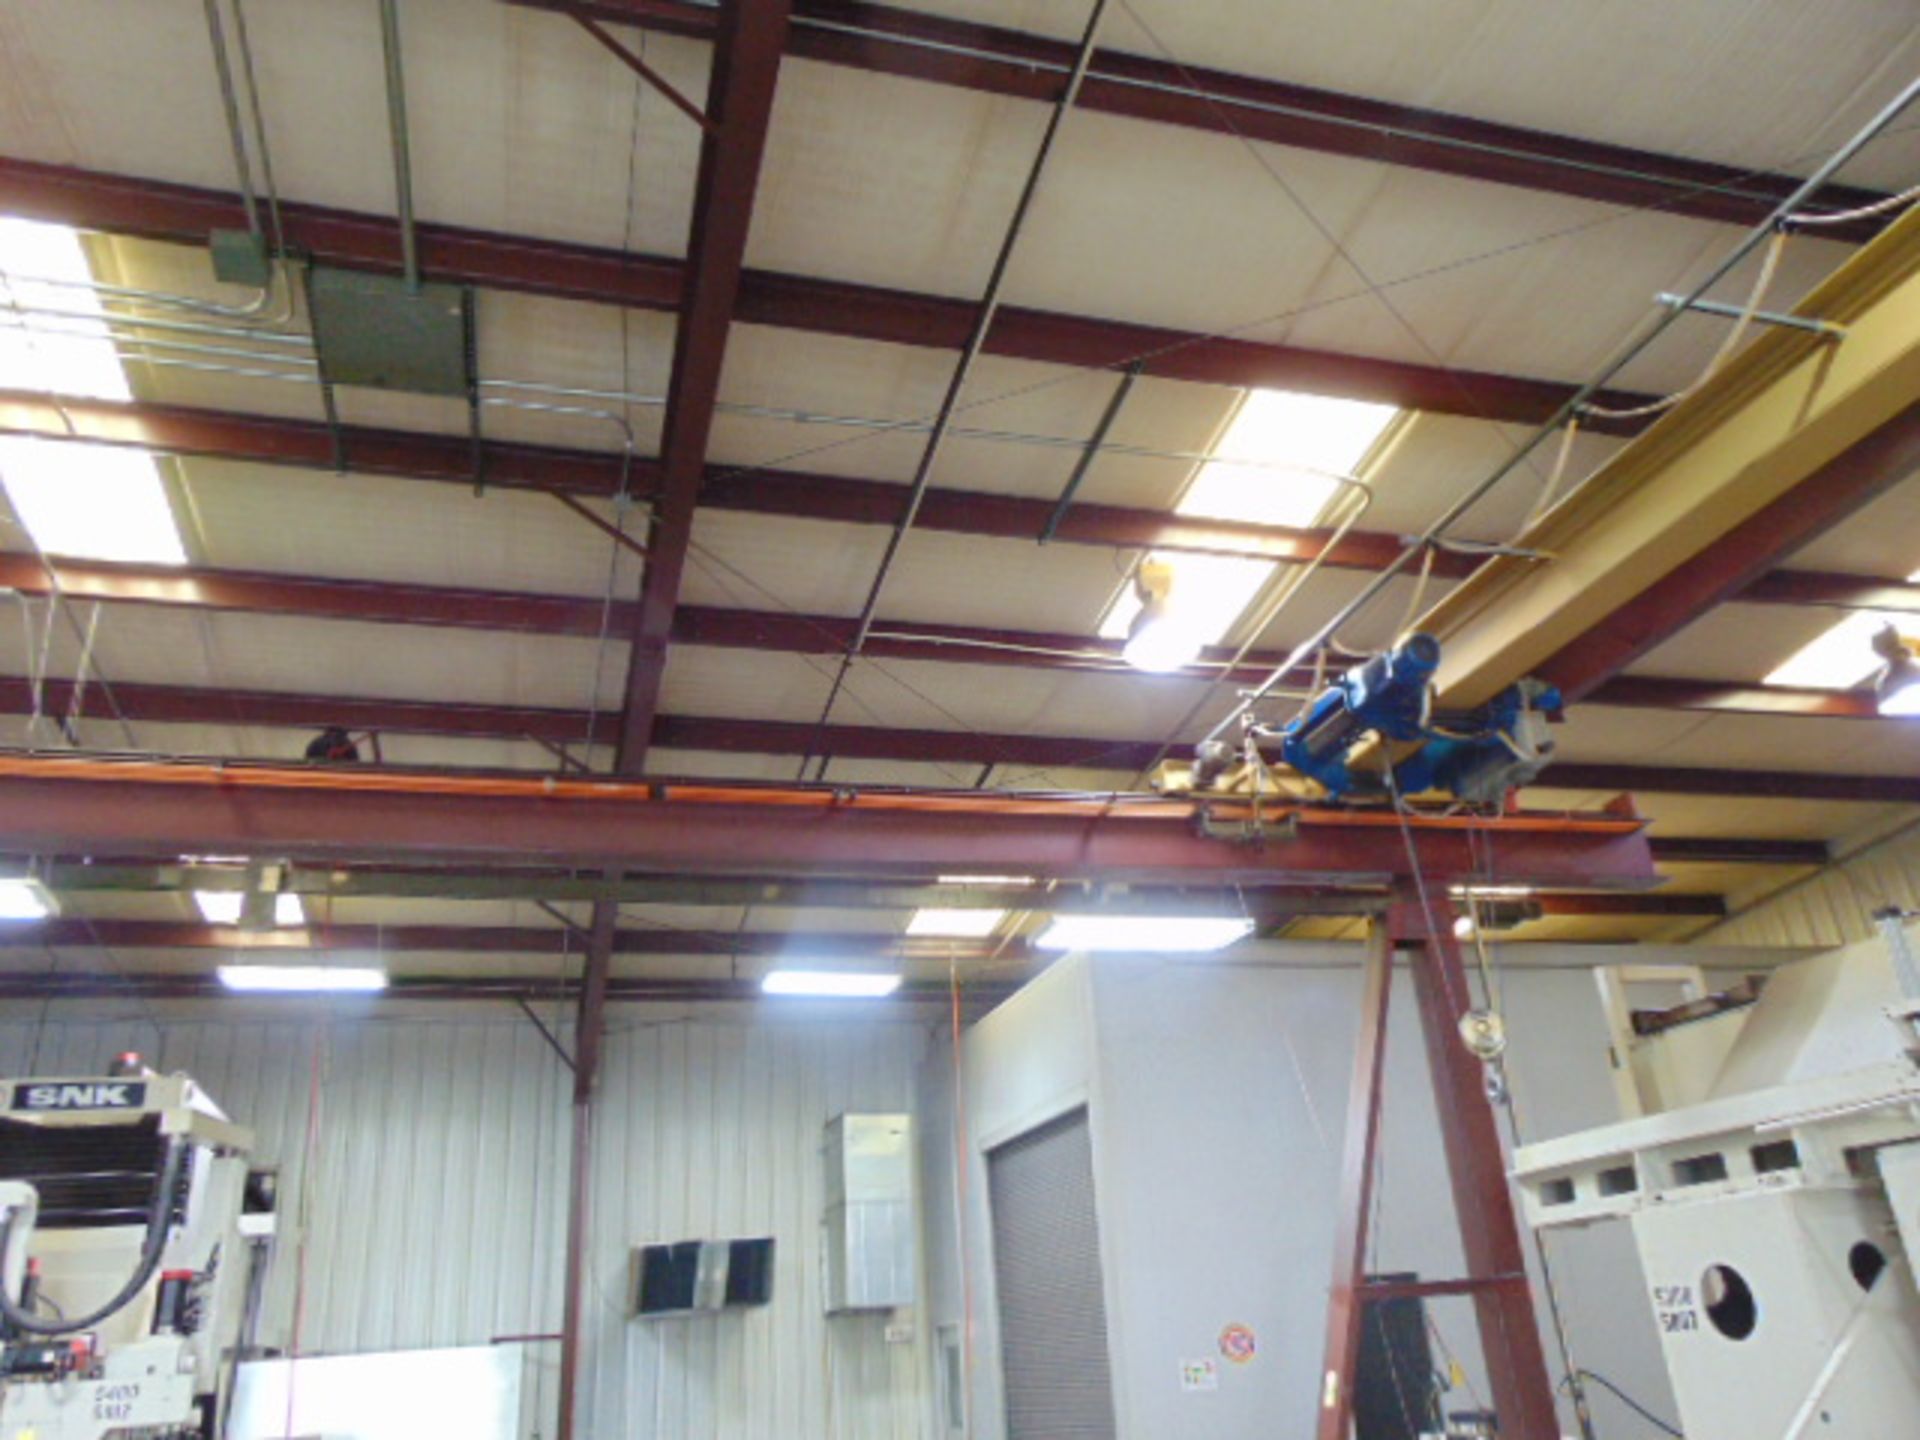 FREE STANDING BRIDGE CRANE SYSTEM, OMI CRANE SYSTEMS 3 T. X APPROX. 46’ SPAN, approx. 33’ runway - Image 5 of 5